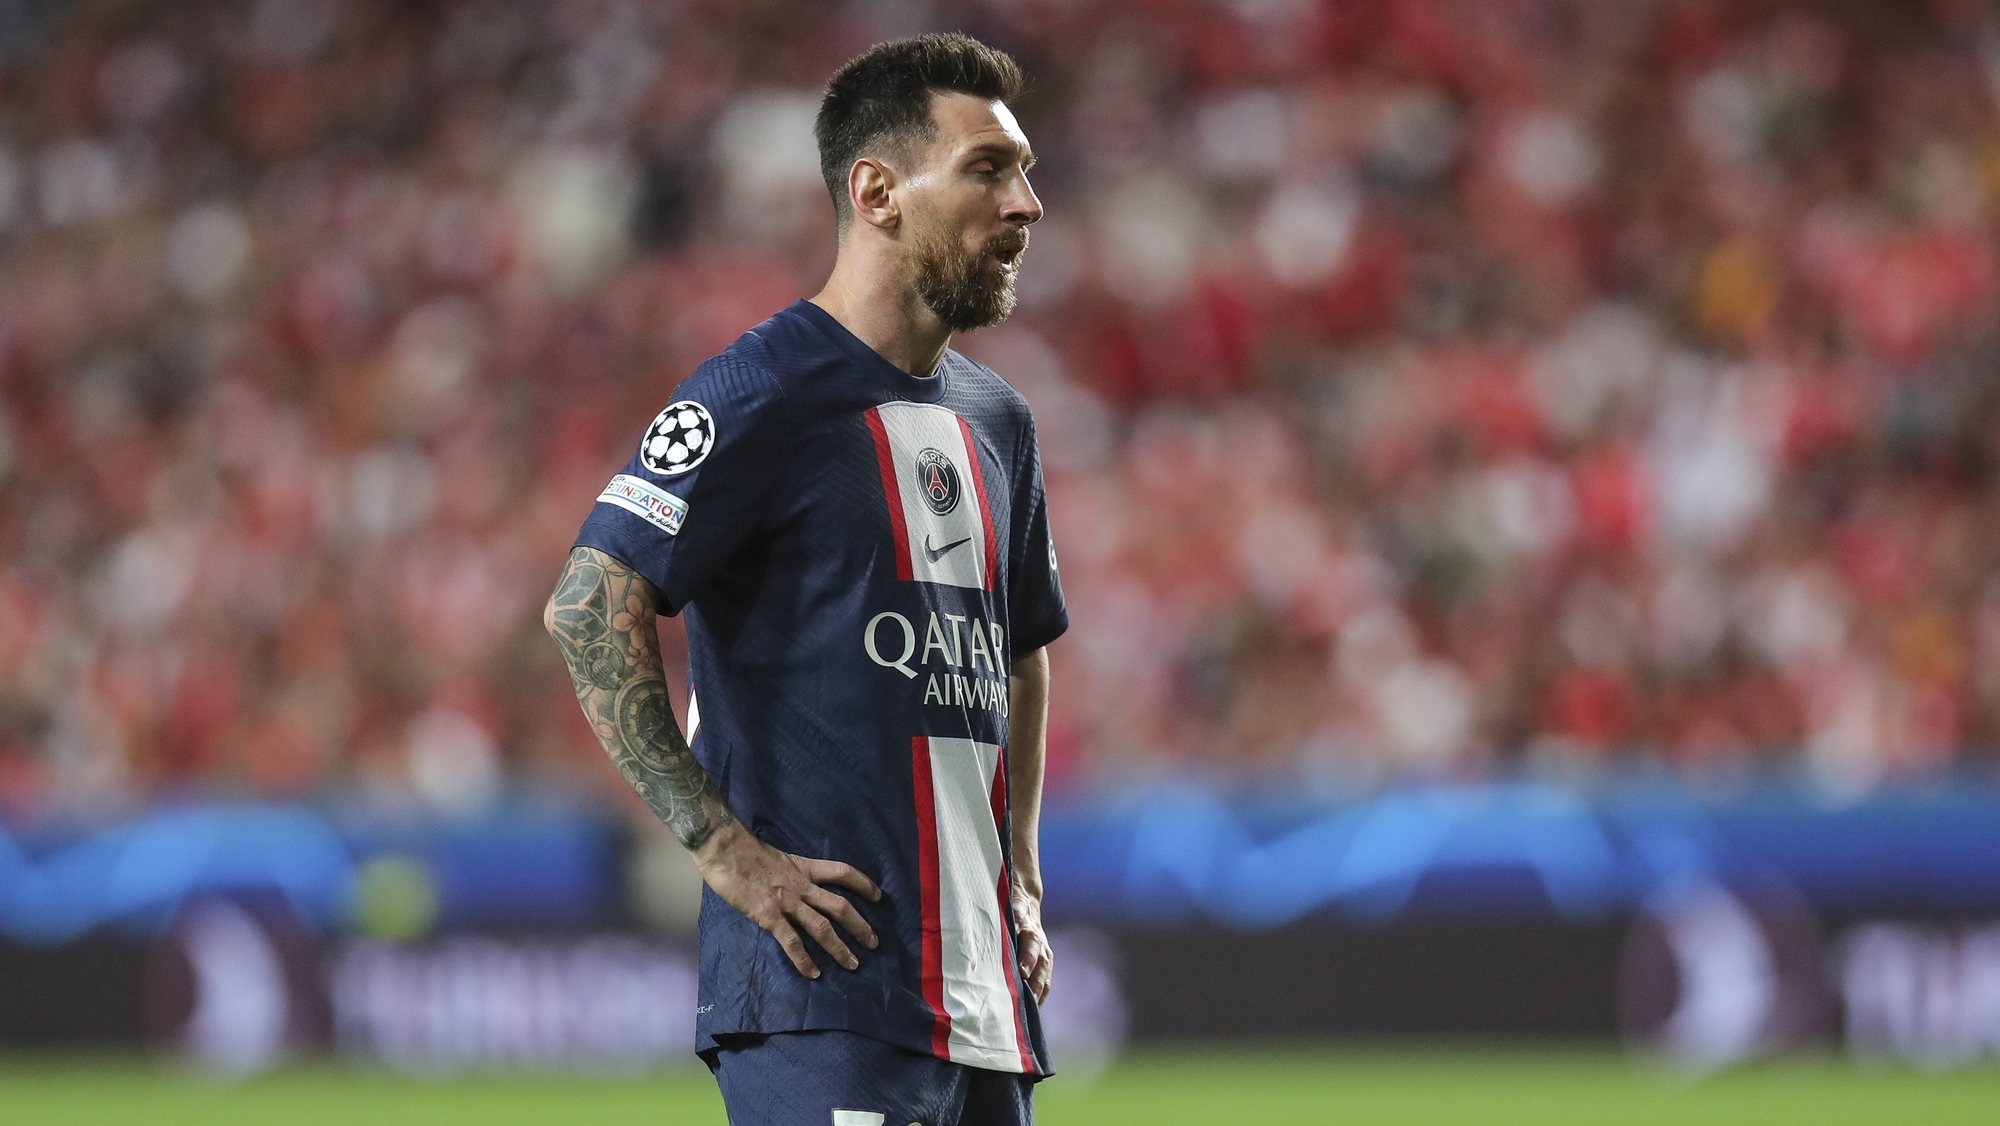 Paris Saint-Germain player Lionel Messi reacts during their UEFA Champions League Group H soccer match with Benfica at Luz Stadium in Lisbon, Portugal, 5 of October 2022. MIGUEL A. LOPES/LUSA